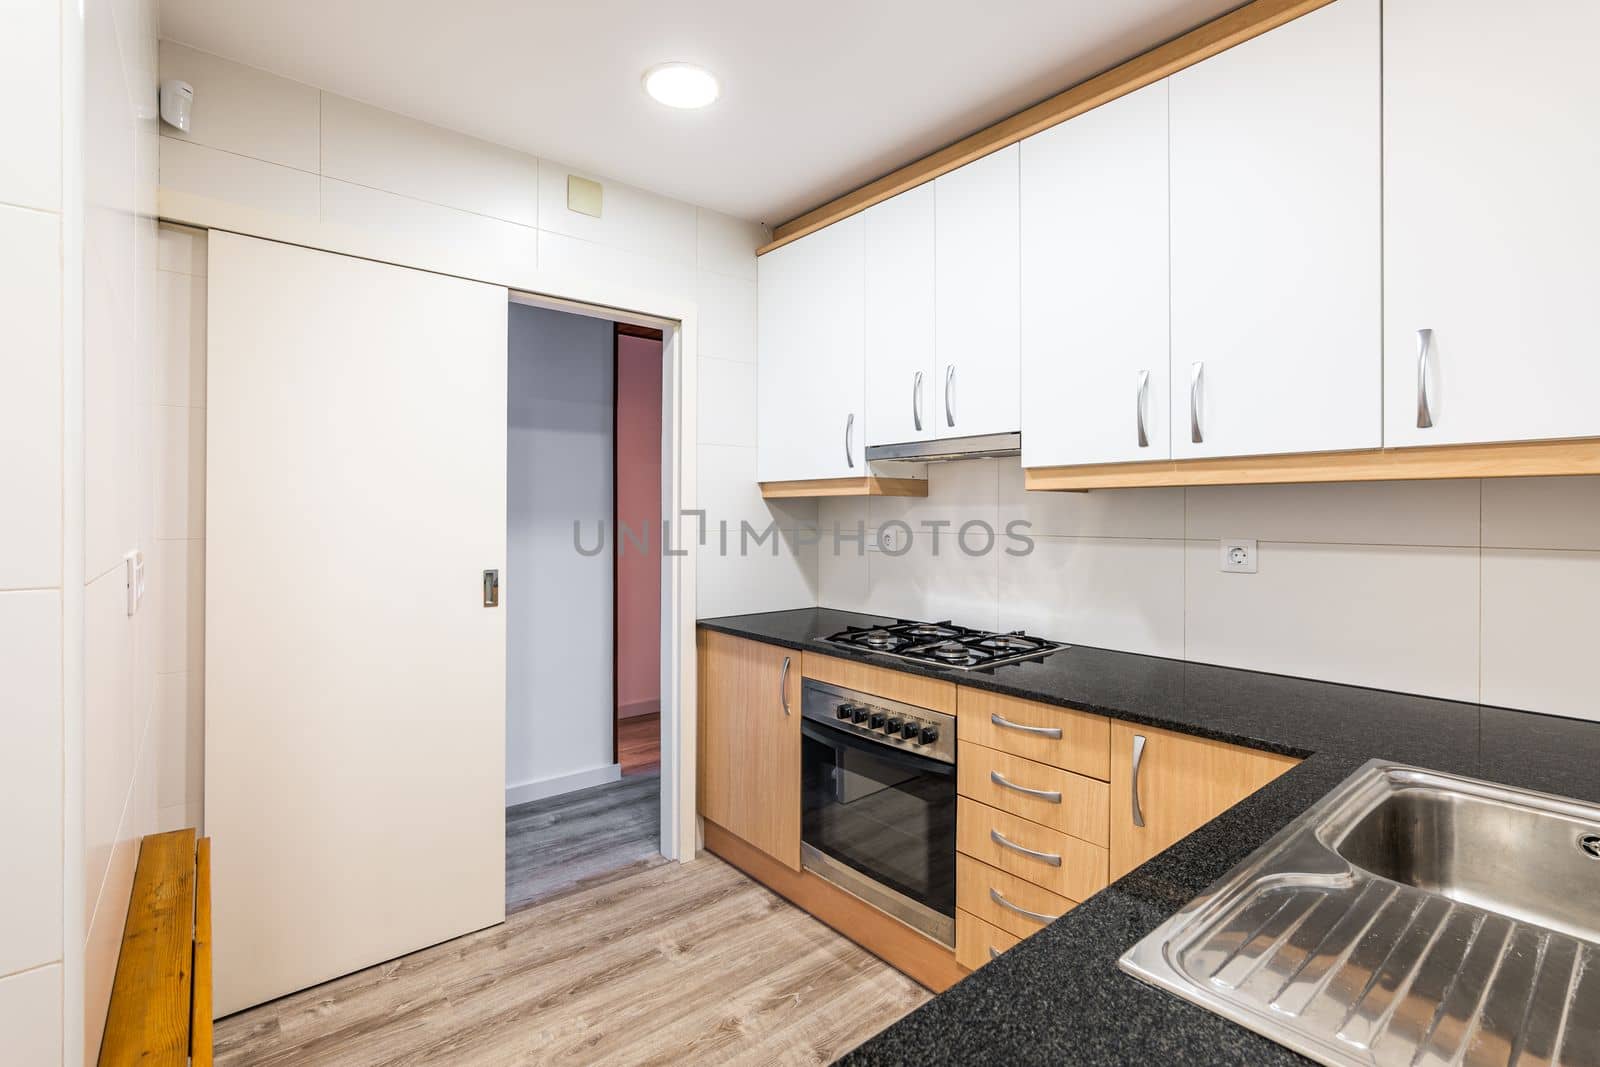 Modular furniture in kitchen with white cabinets on top of wall and cabinets with wood doors below. Black worktop with gas stove. On wall opposite, there is folding solid wood tabletop to save space. by apavlin